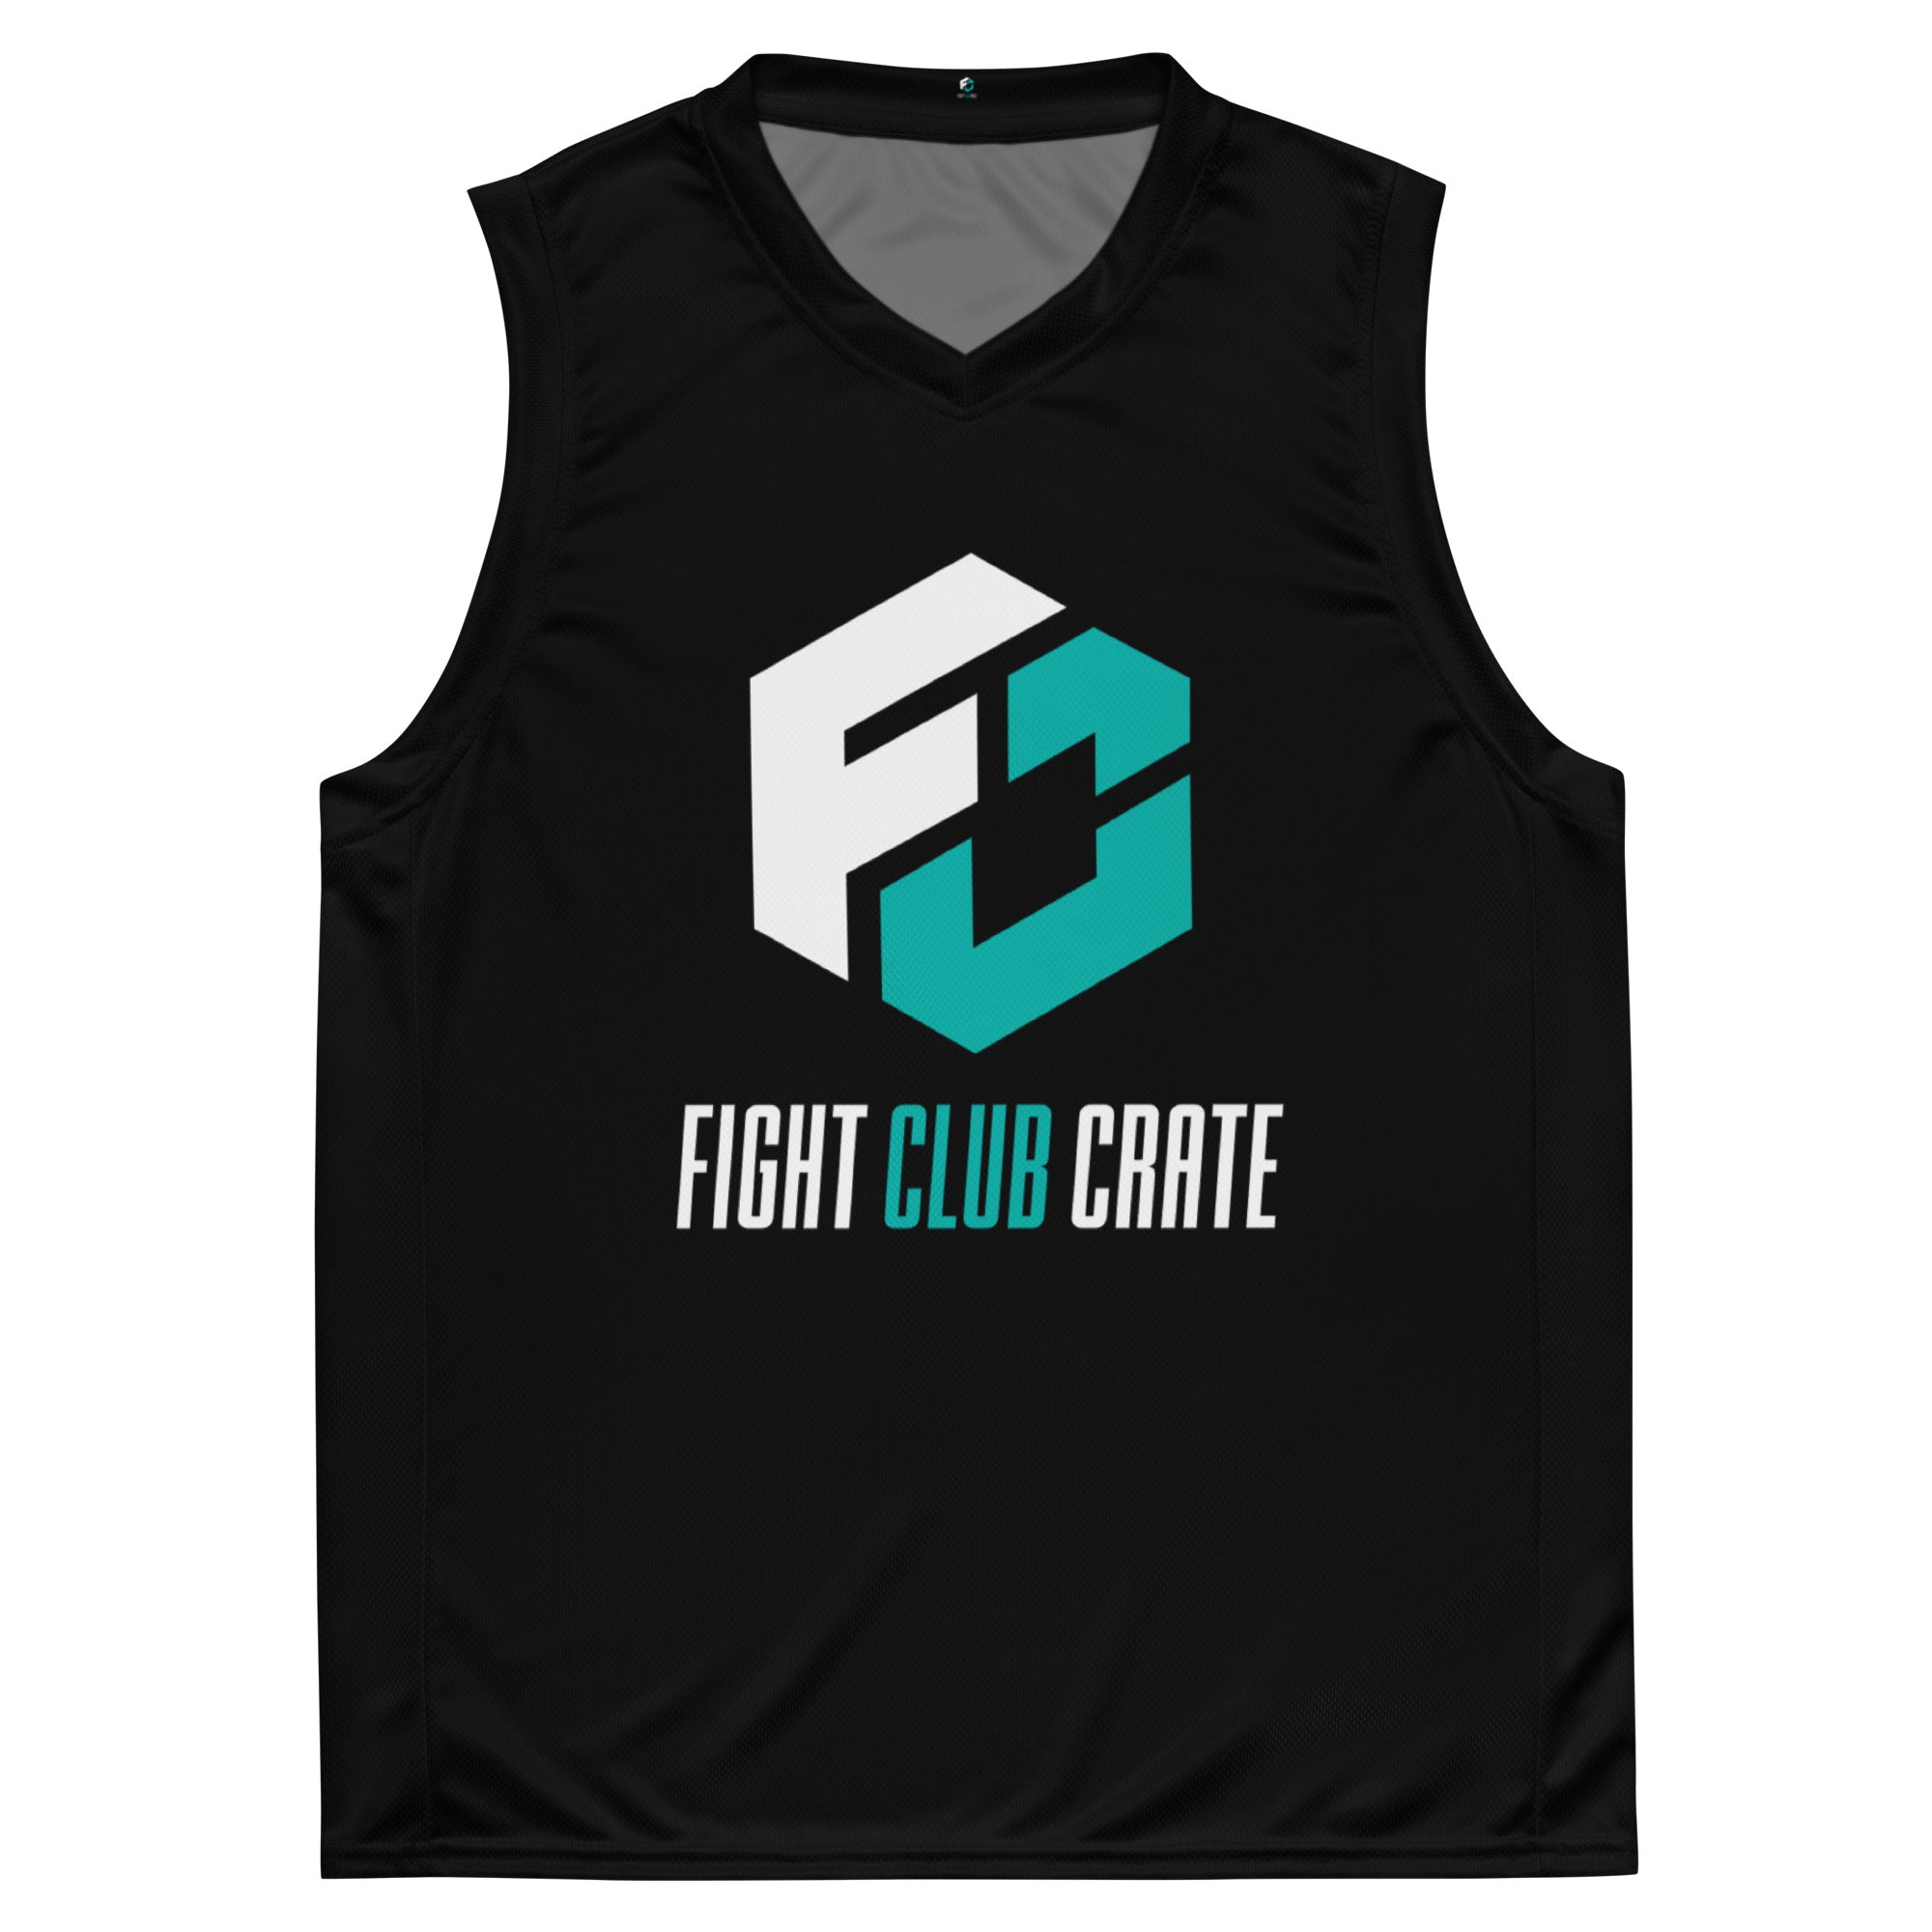 Fight Club Crate Training Jersey